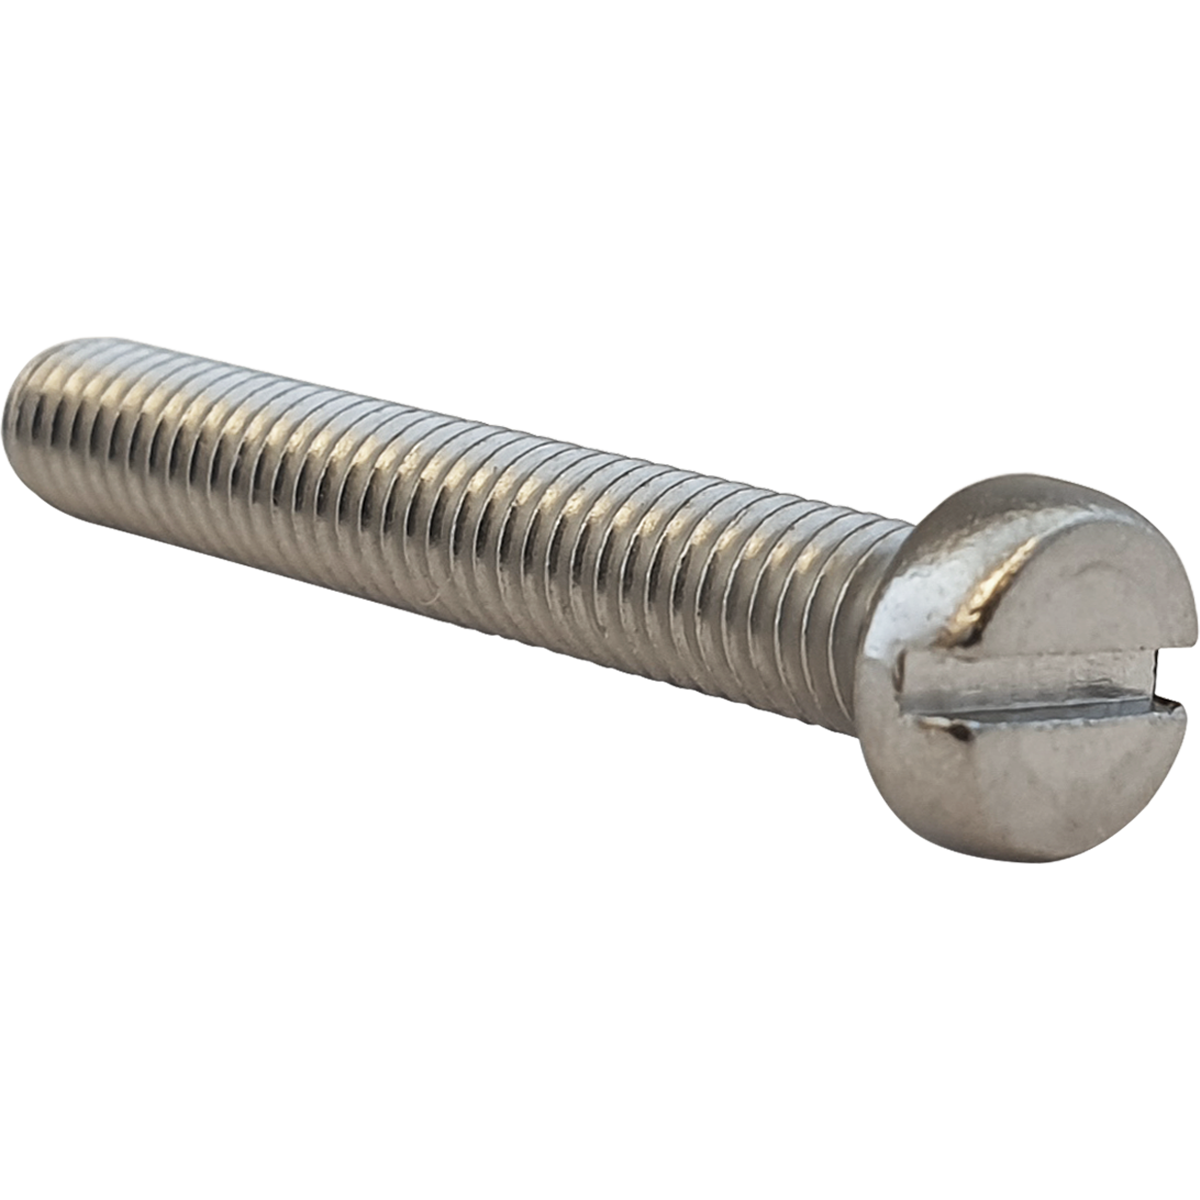 Corrosion resistant A2 stainless steel cheese head machine screws at competitive prices